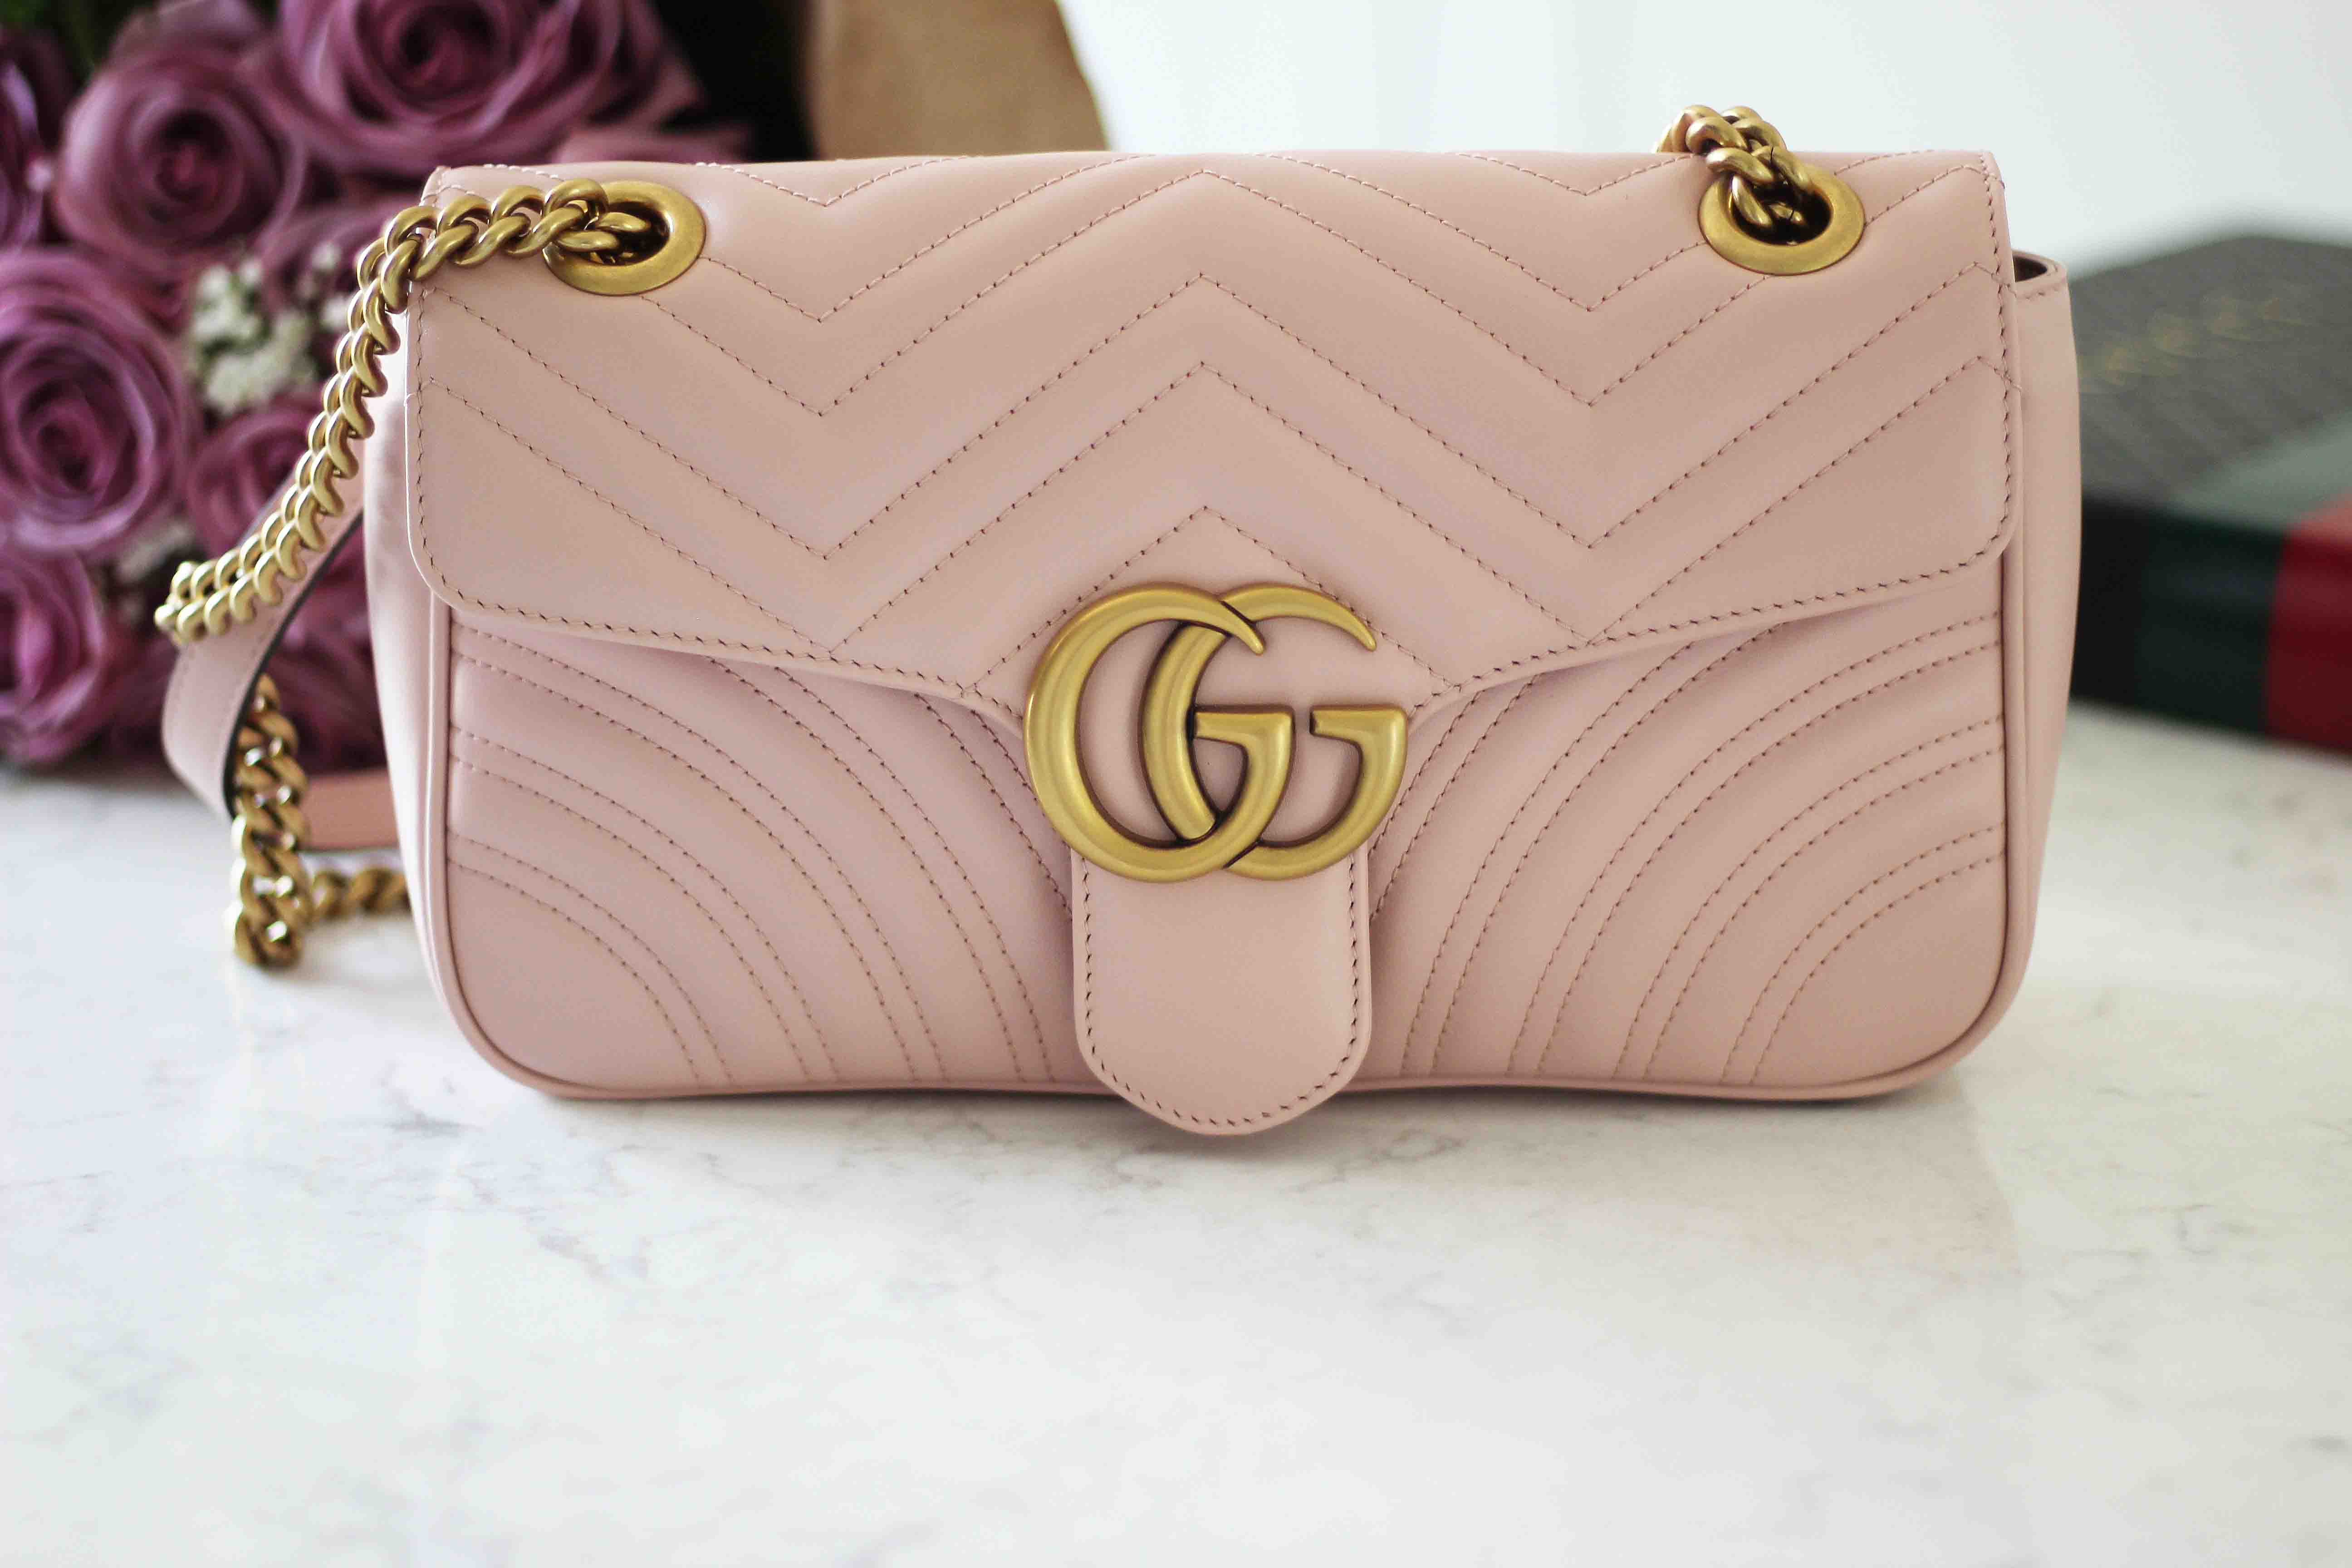 sparkleshinylove Comparing the Gucci GG Matelassé to the Chanel Classic Flap Bag